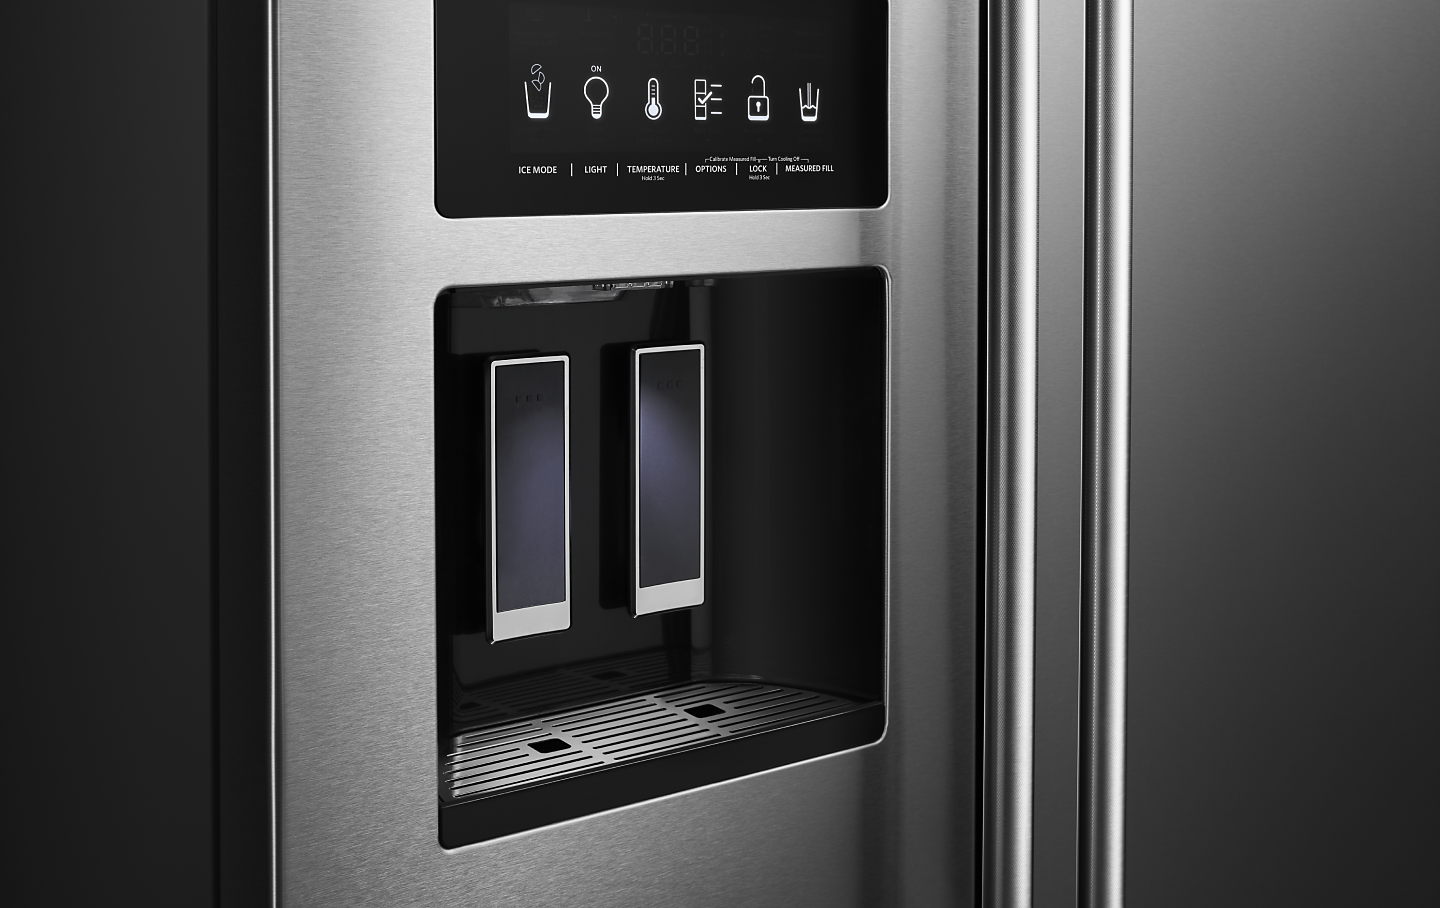 Refrigerator ice maker and water dispenser control panel